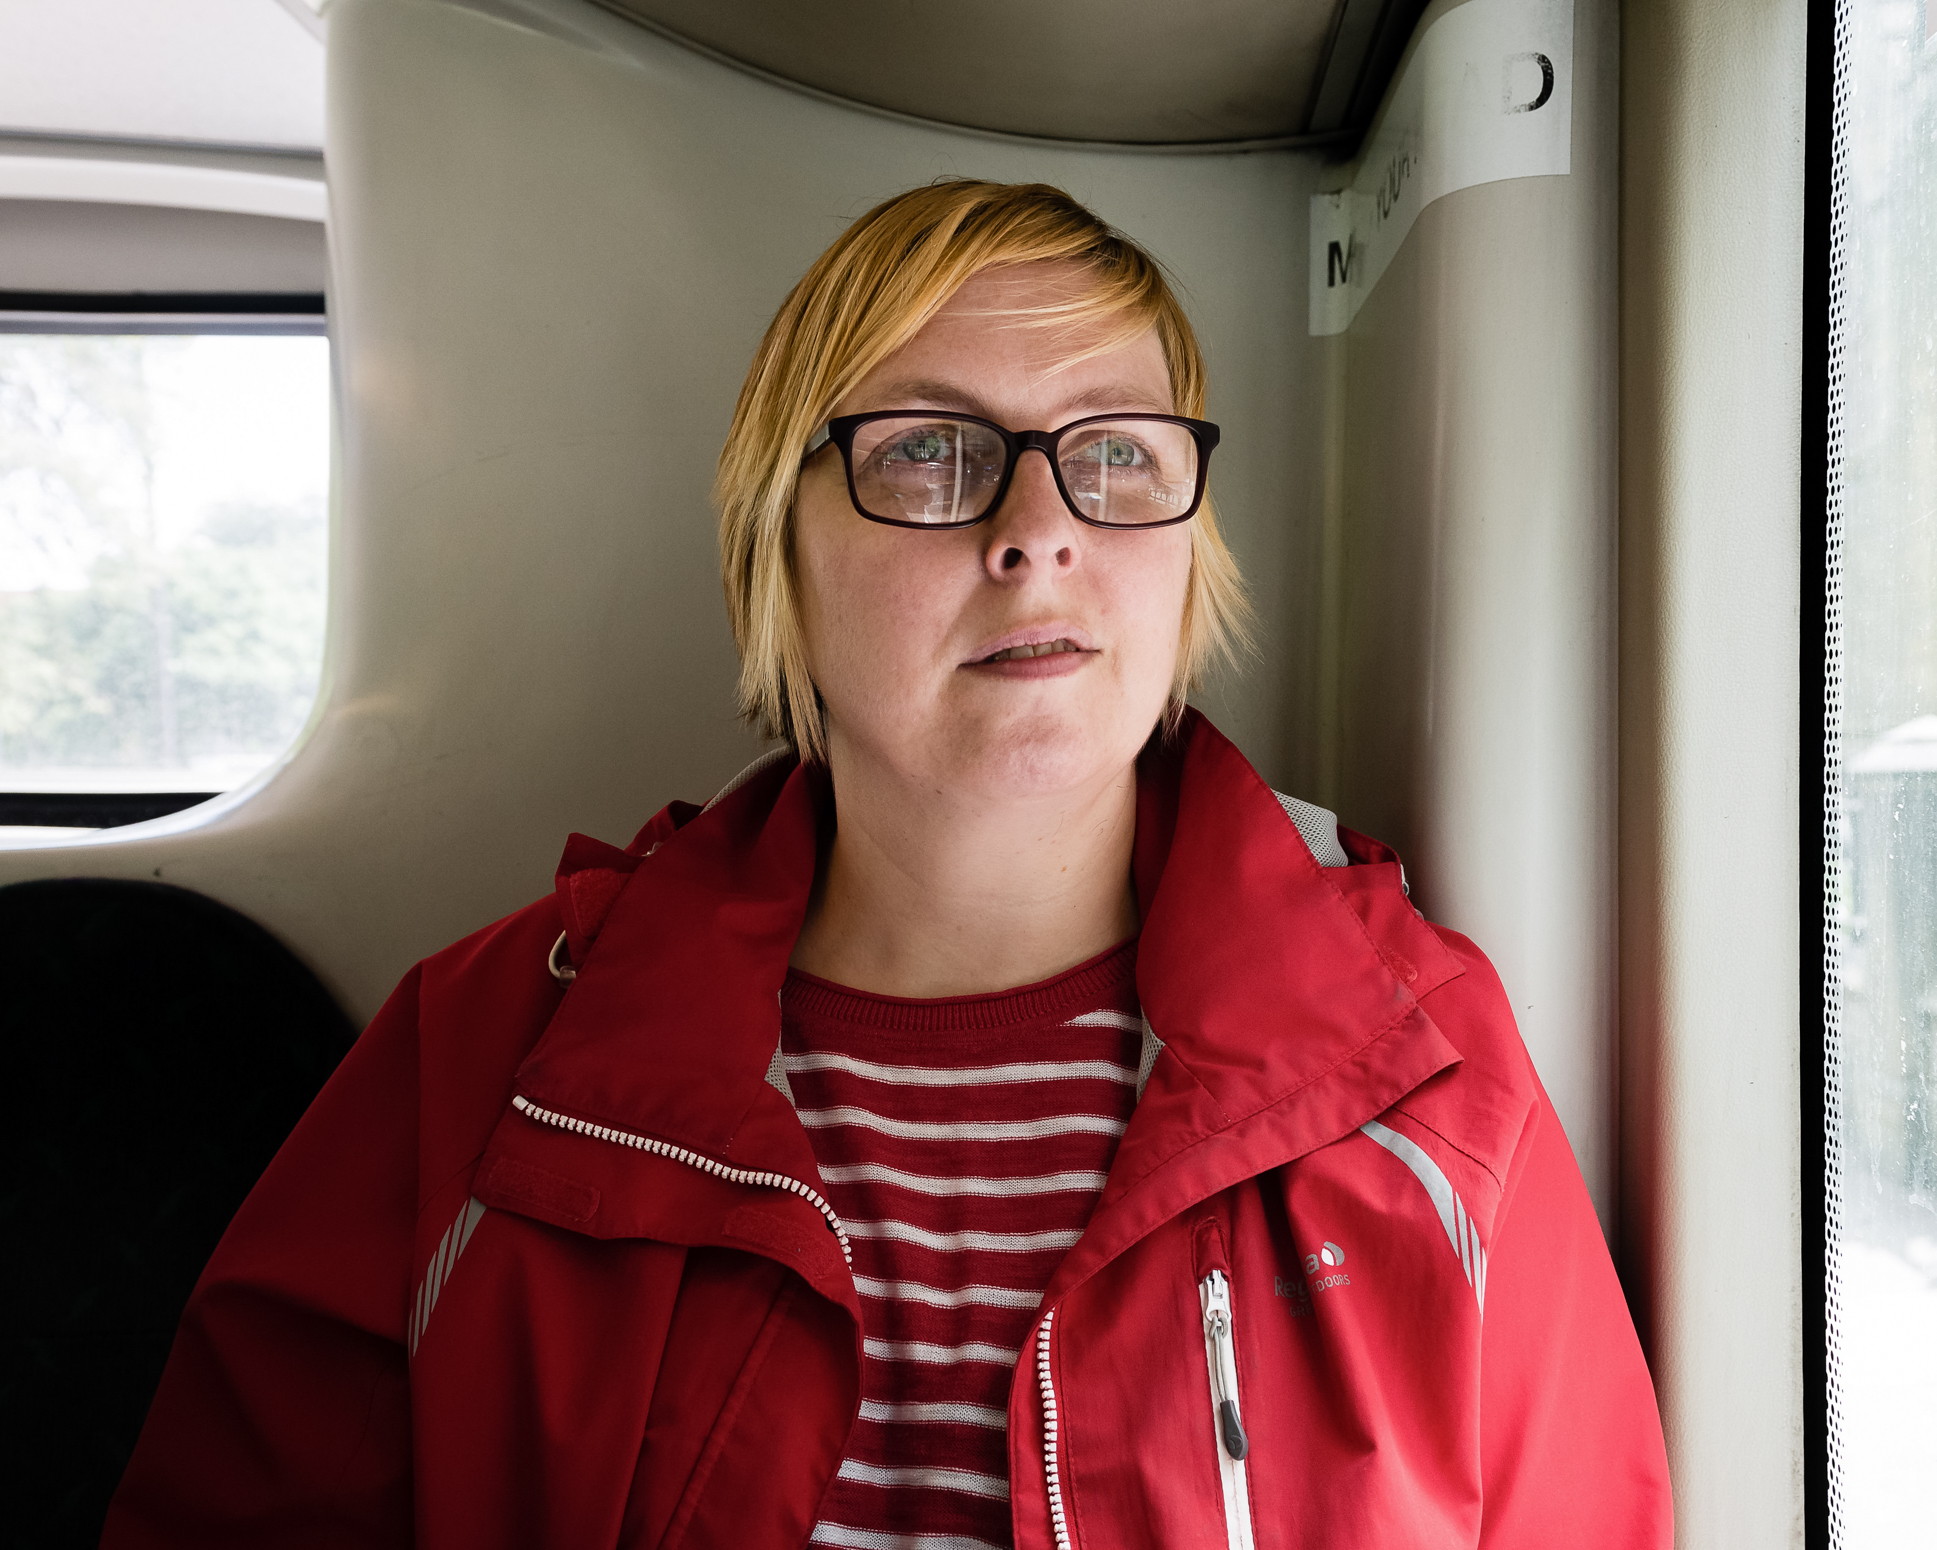  Katie  I can walk out of my door and get on a bus and go anywhere, that sense of freedom stops me feeling trapped when life seems difficult.&nbsp;The furthest I've been on a bus is to south Poland, it took hours and hours. I was nineteen and it was 